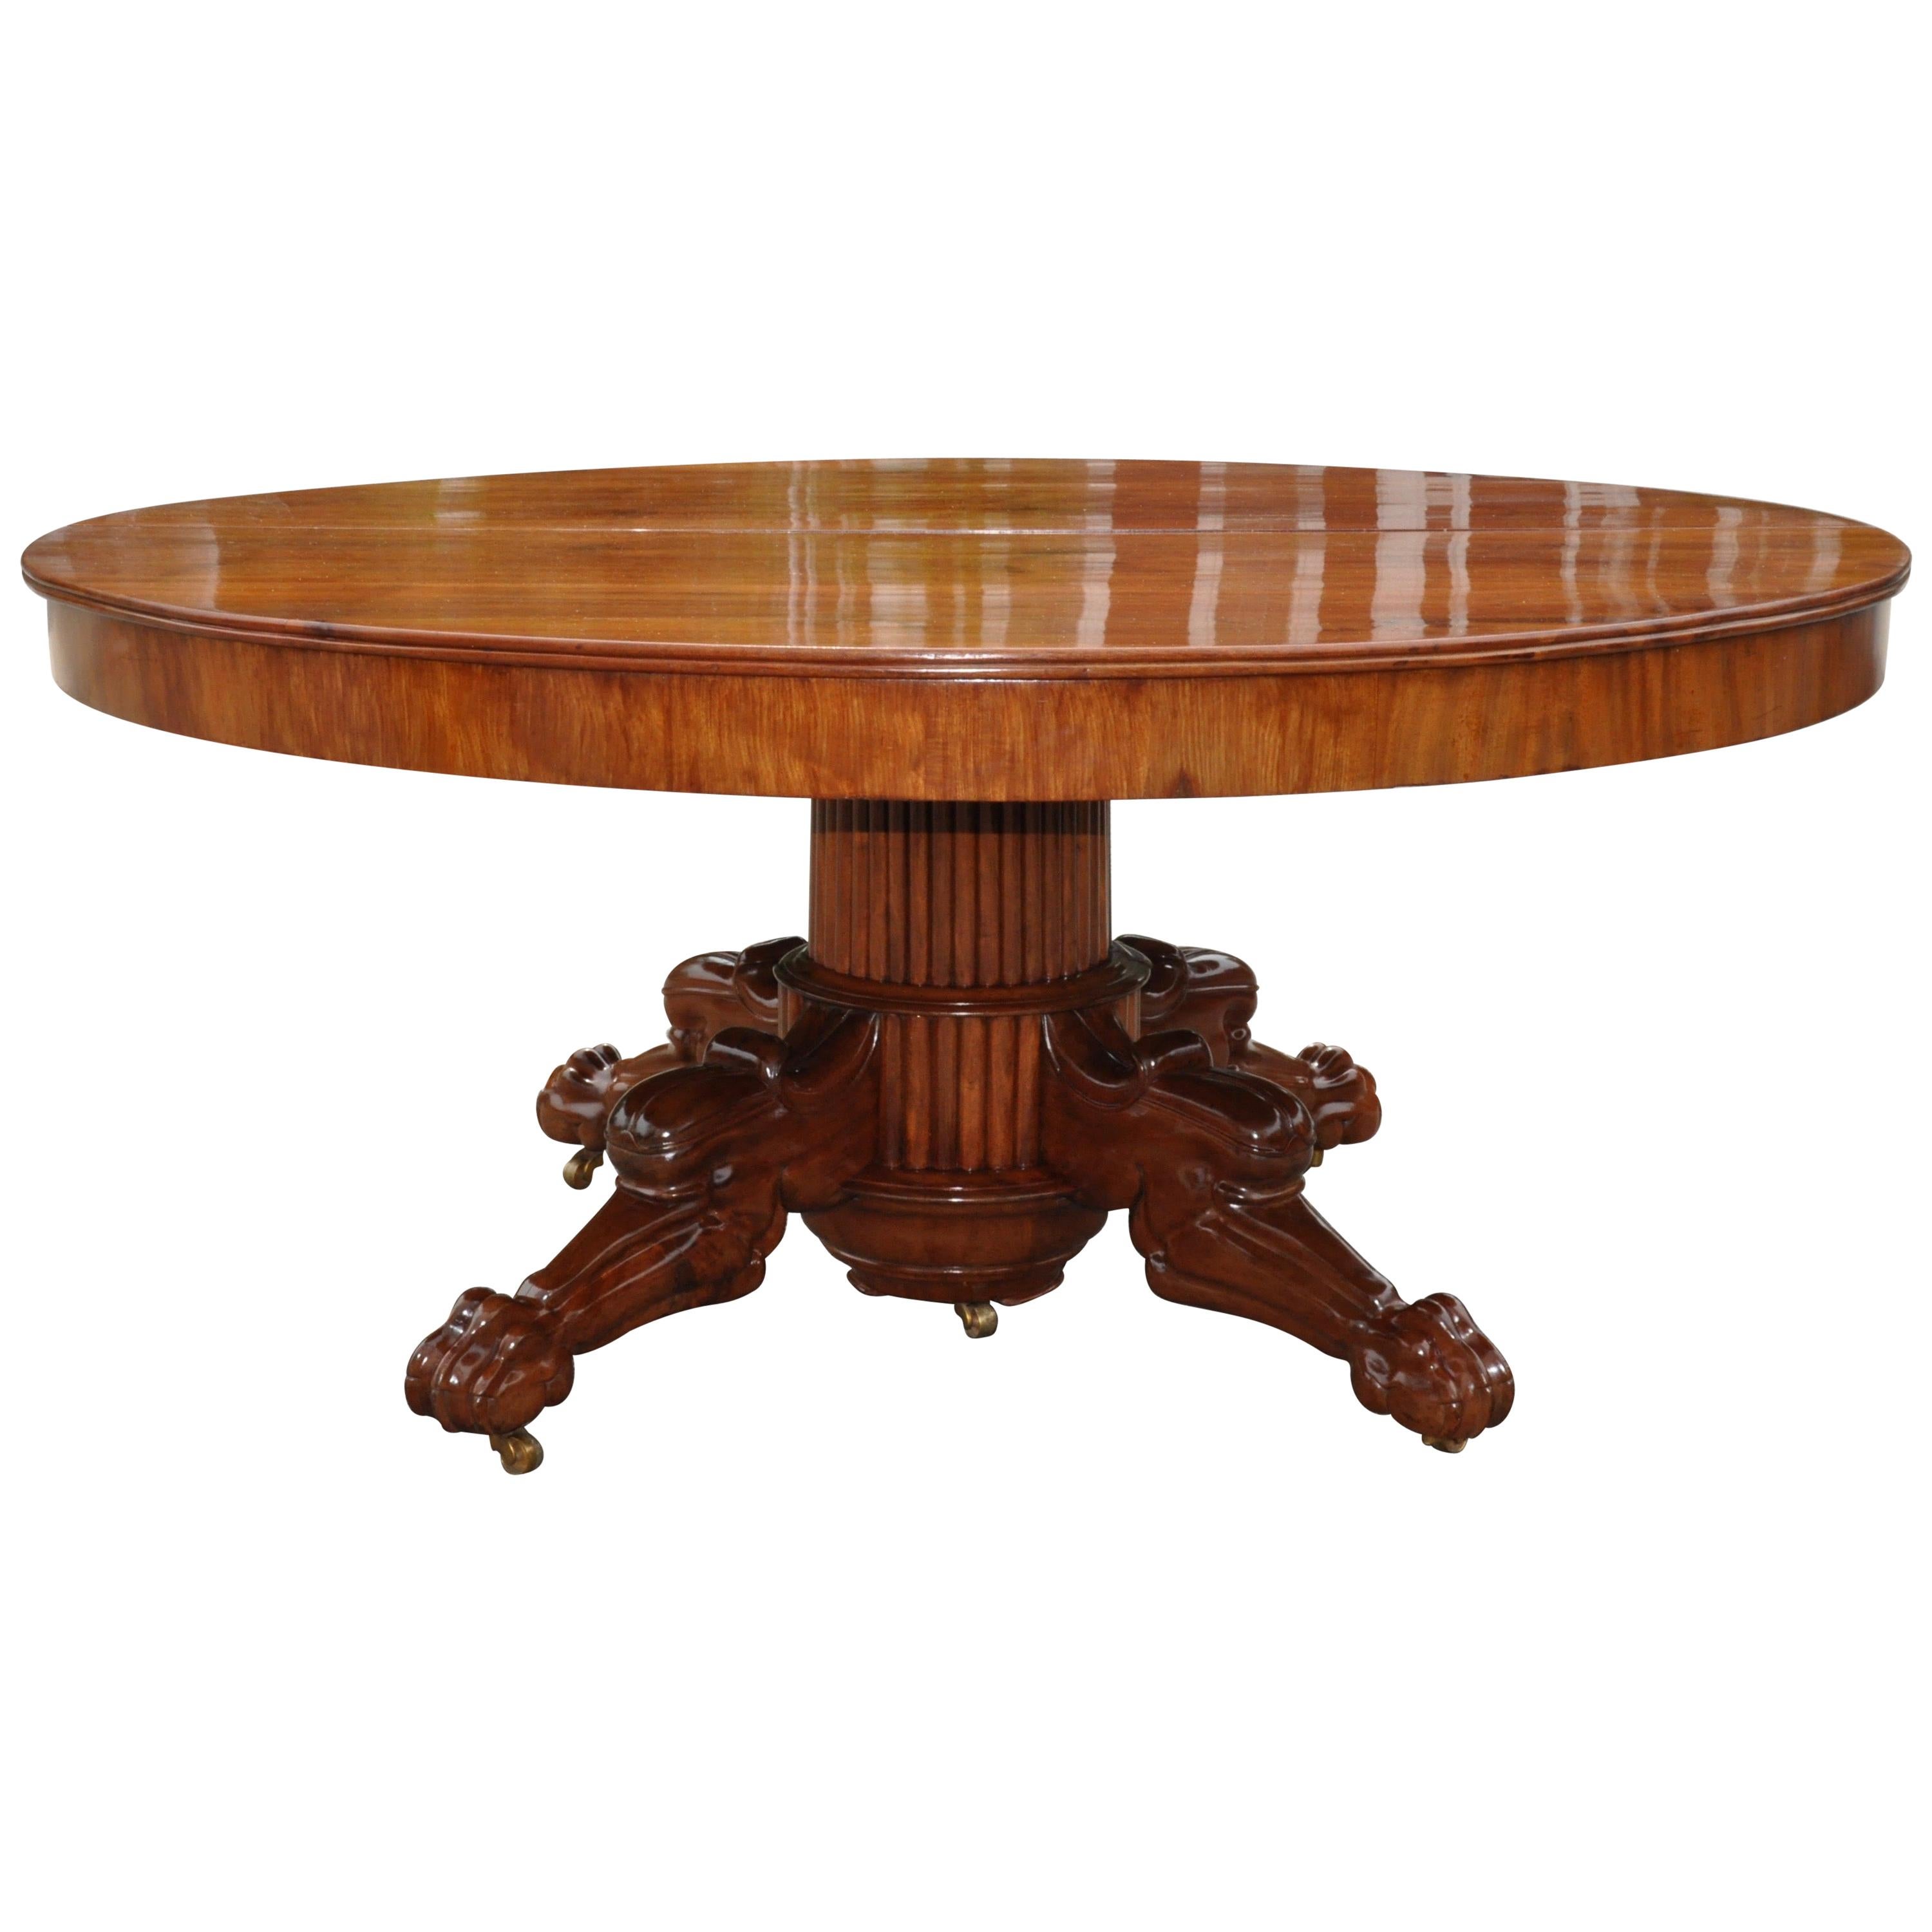 Period Early 19th Century Neoclassical Walnut Round Expanding Dining Table